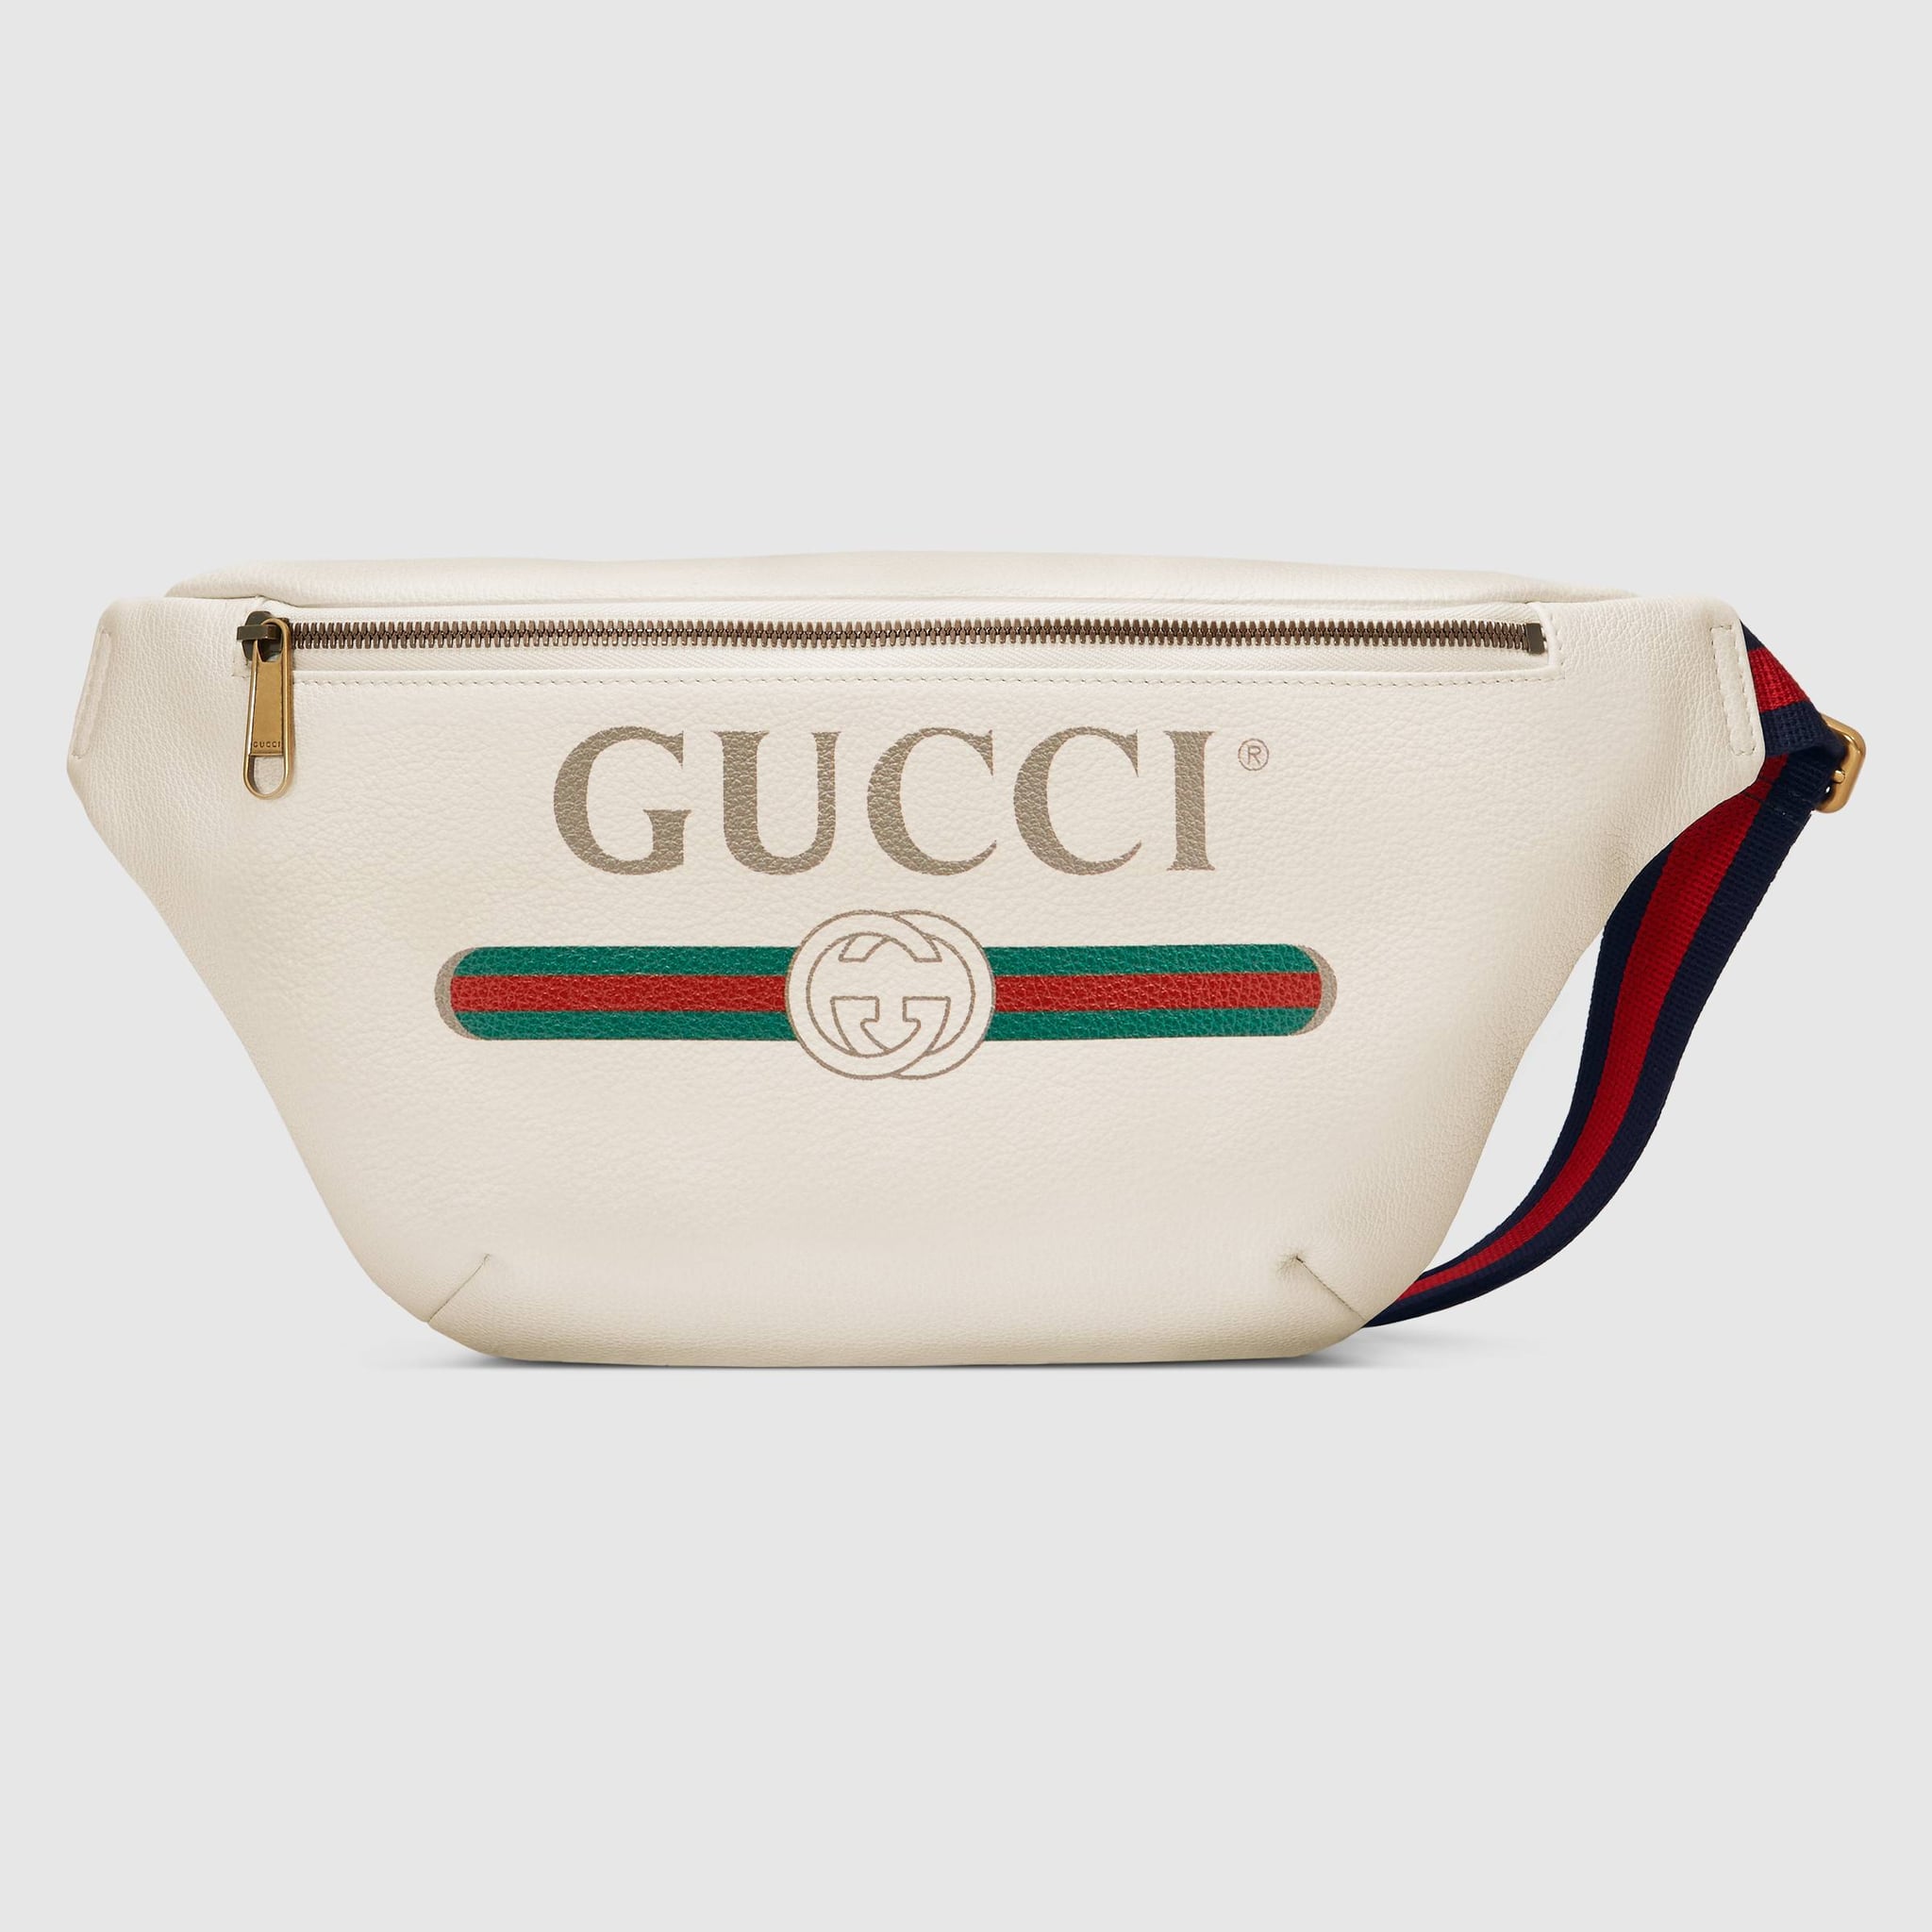 gucci fanny pack with writing on it